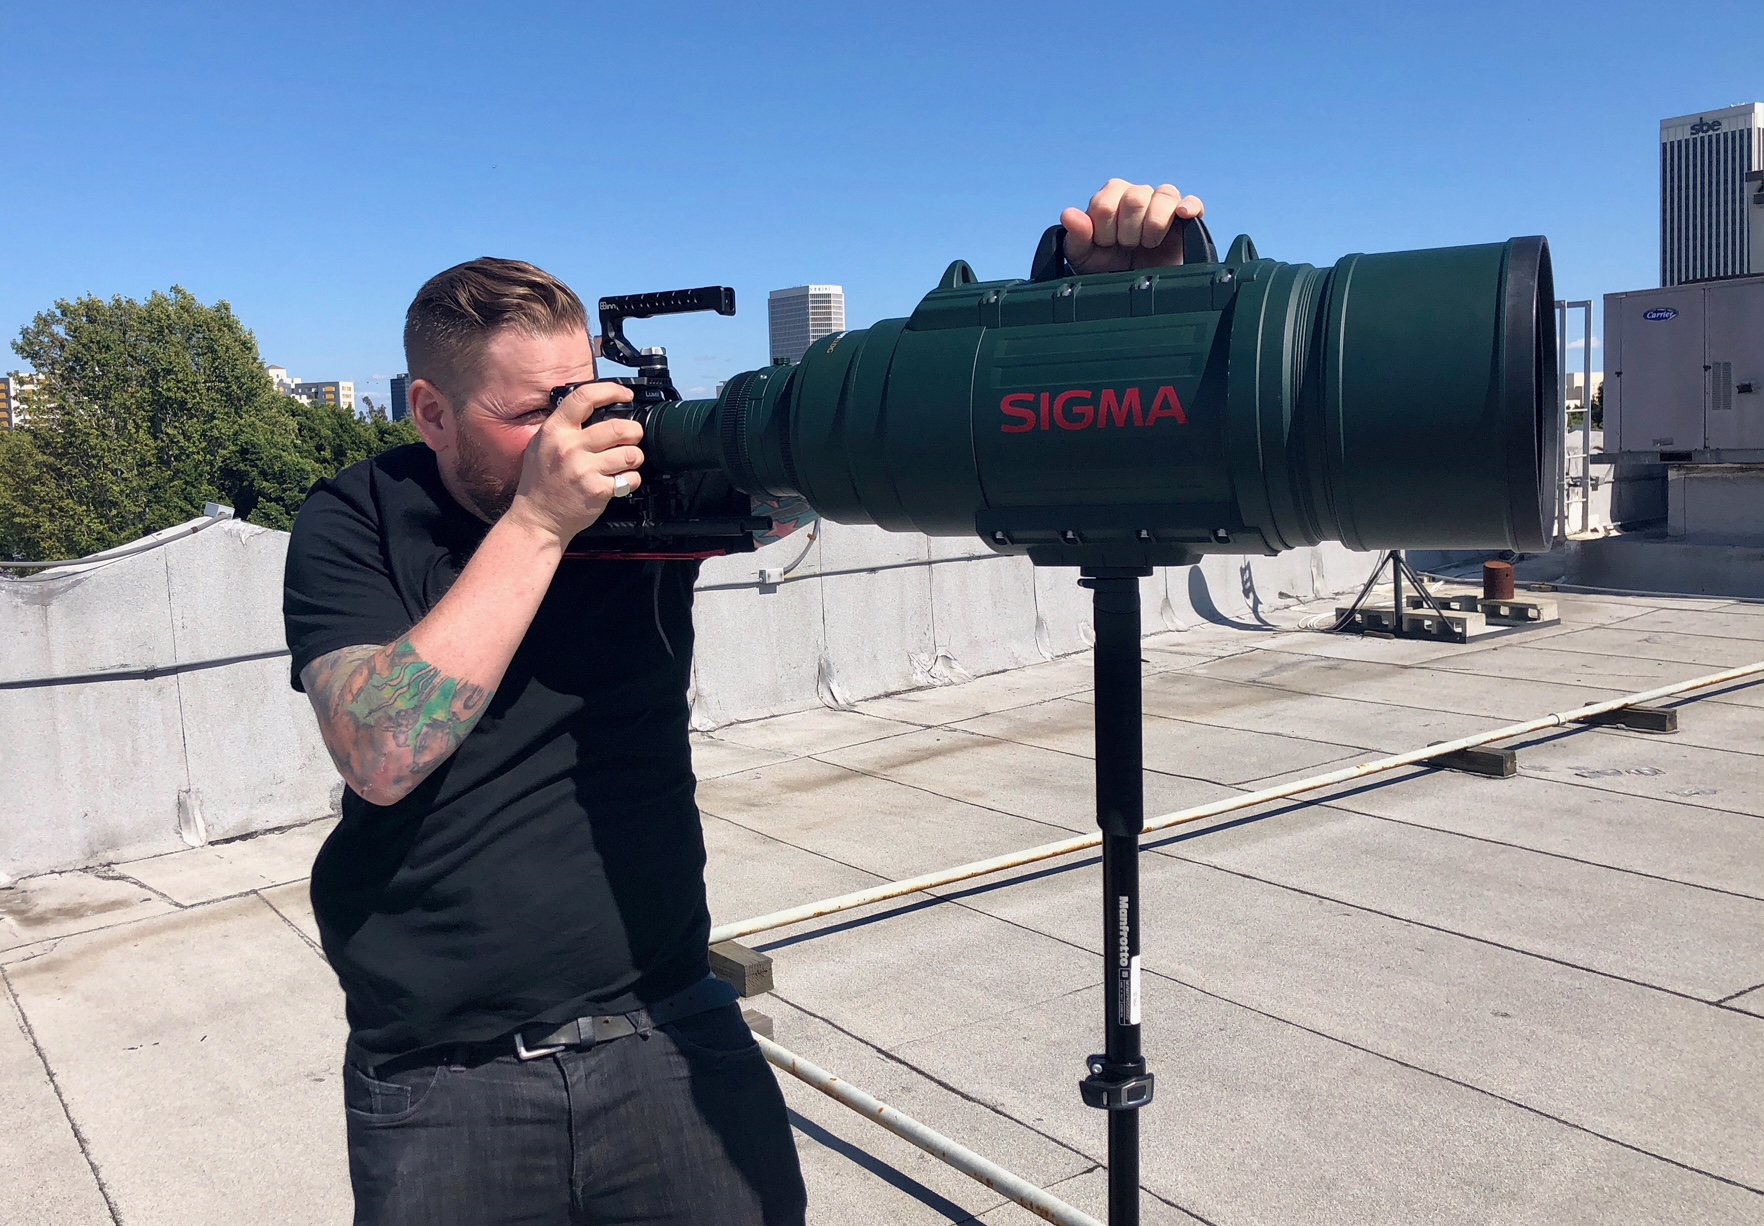 Five Things That Cost the Same as The Sigma 200-500mm F2.8 APO EX DG